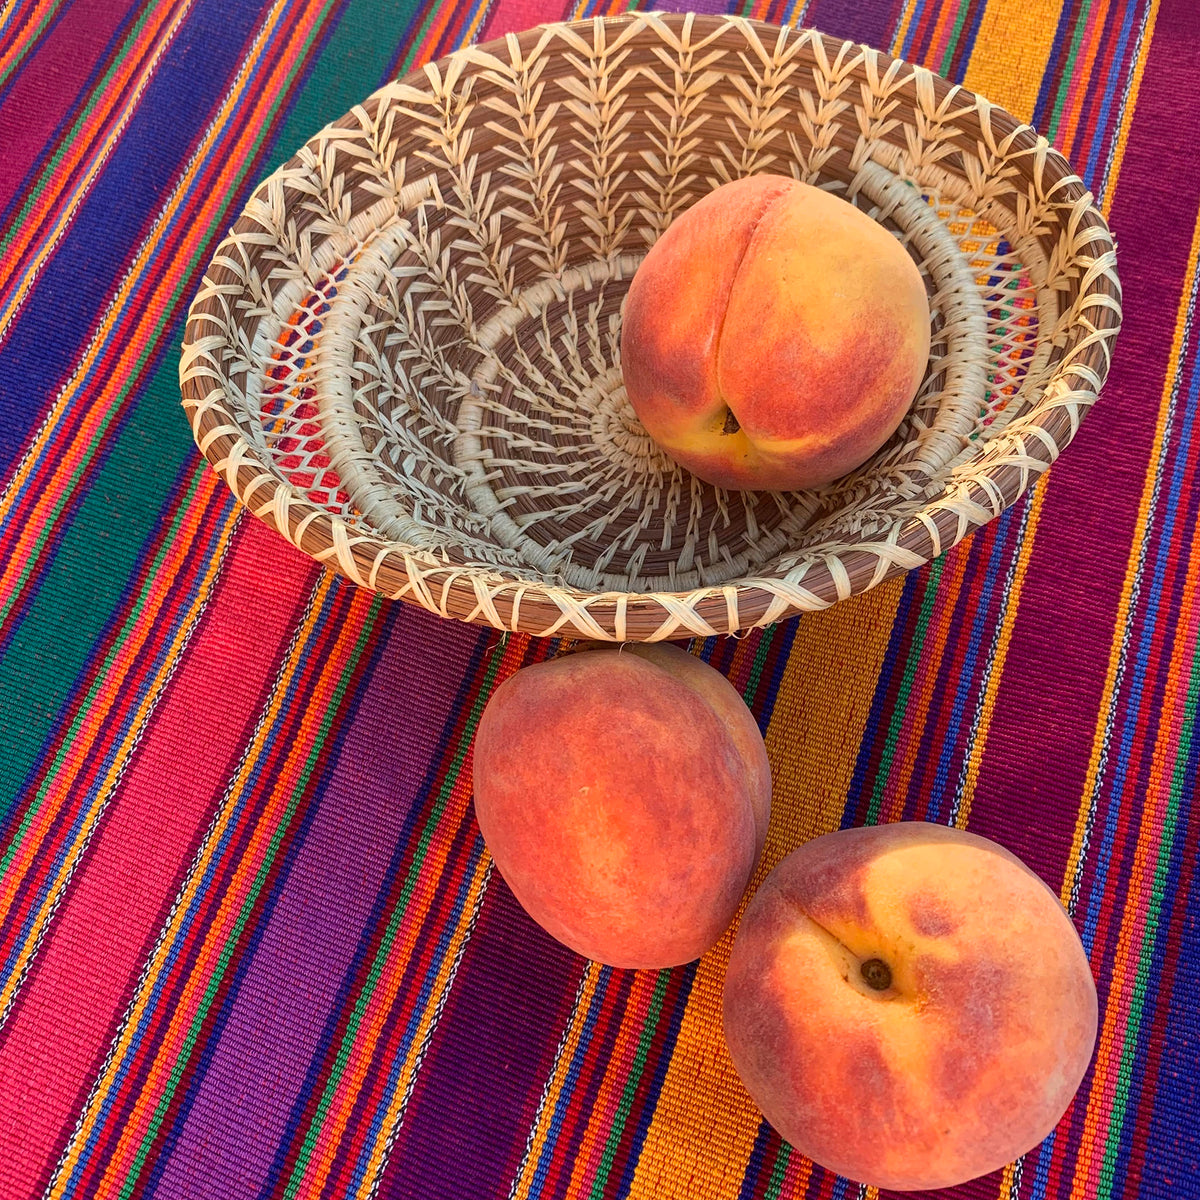 peaches and pine needle basket on handwoven tablecloth